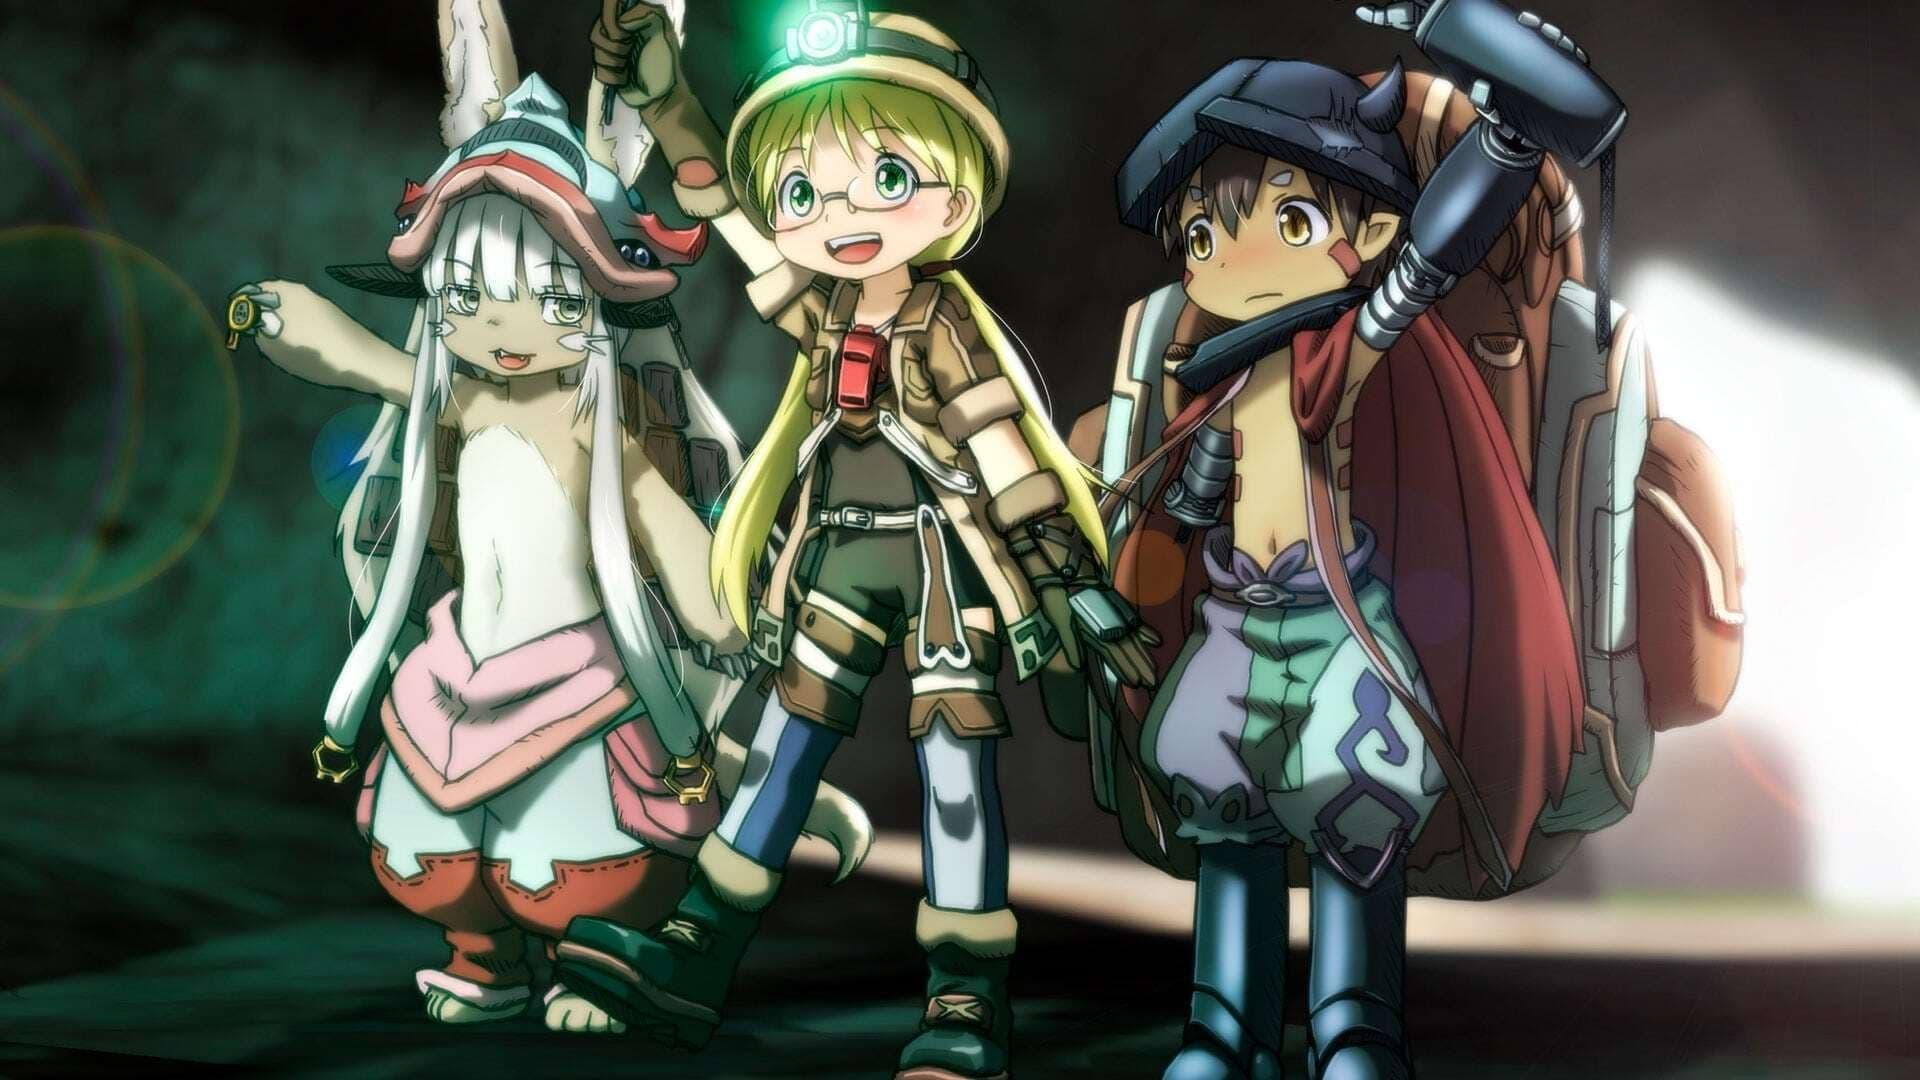 Made in Abyss: Wandering Twilight backdrop